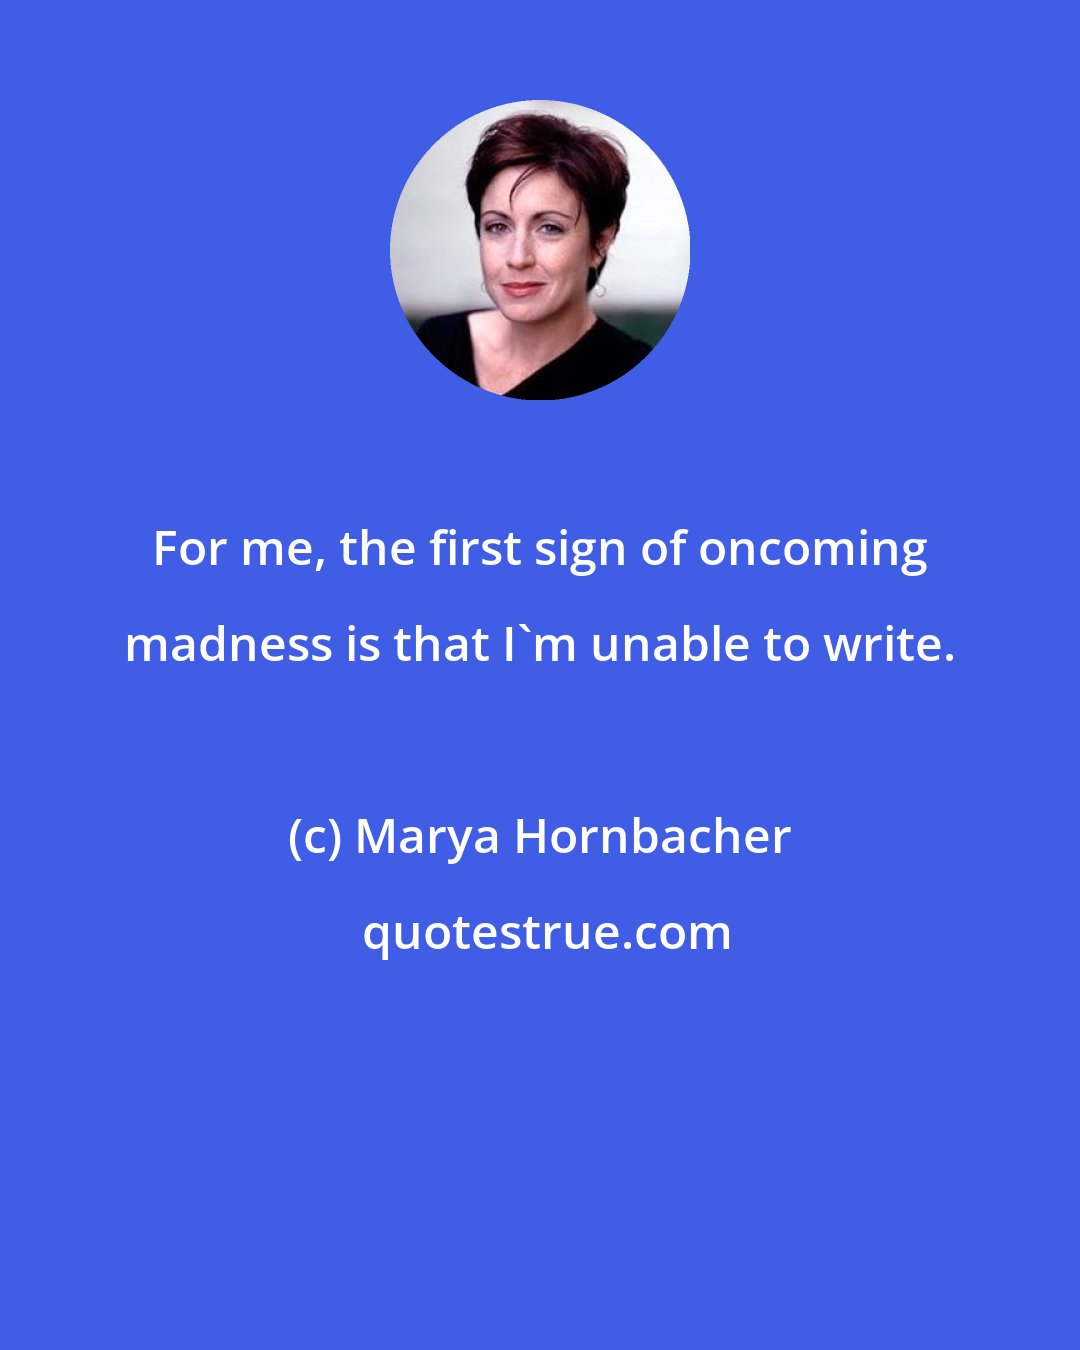 Marya Hornbacher: For me, the first sign of oncoming madness is that I'm unable to write.